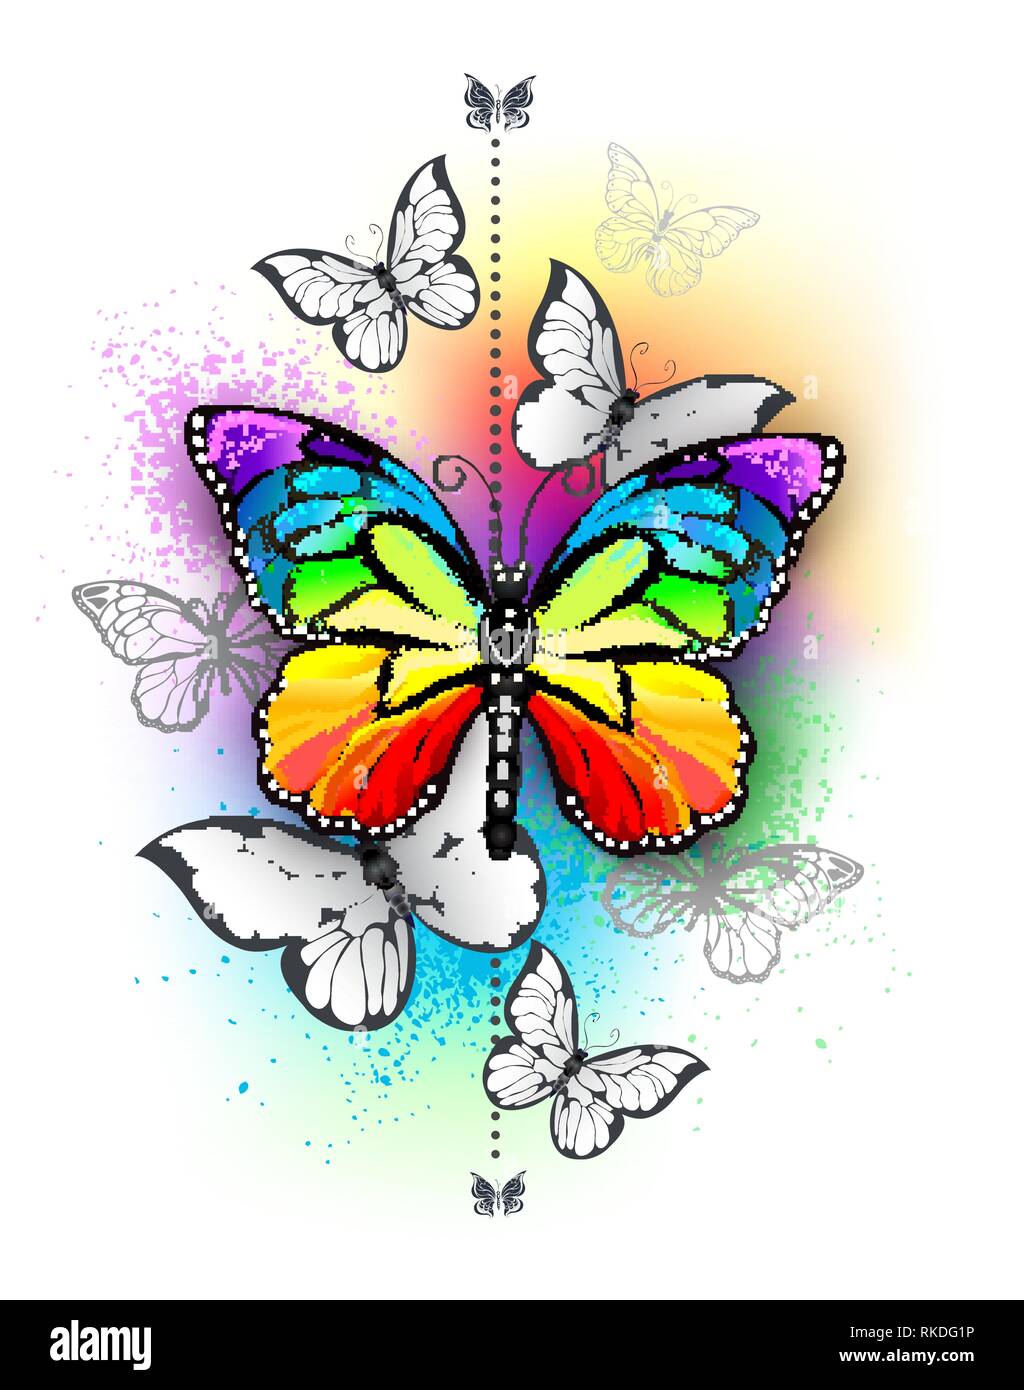 Vertical composition with rainbow and white butterflies on iridescent multicolored background. Tattoo style. Stock Vector